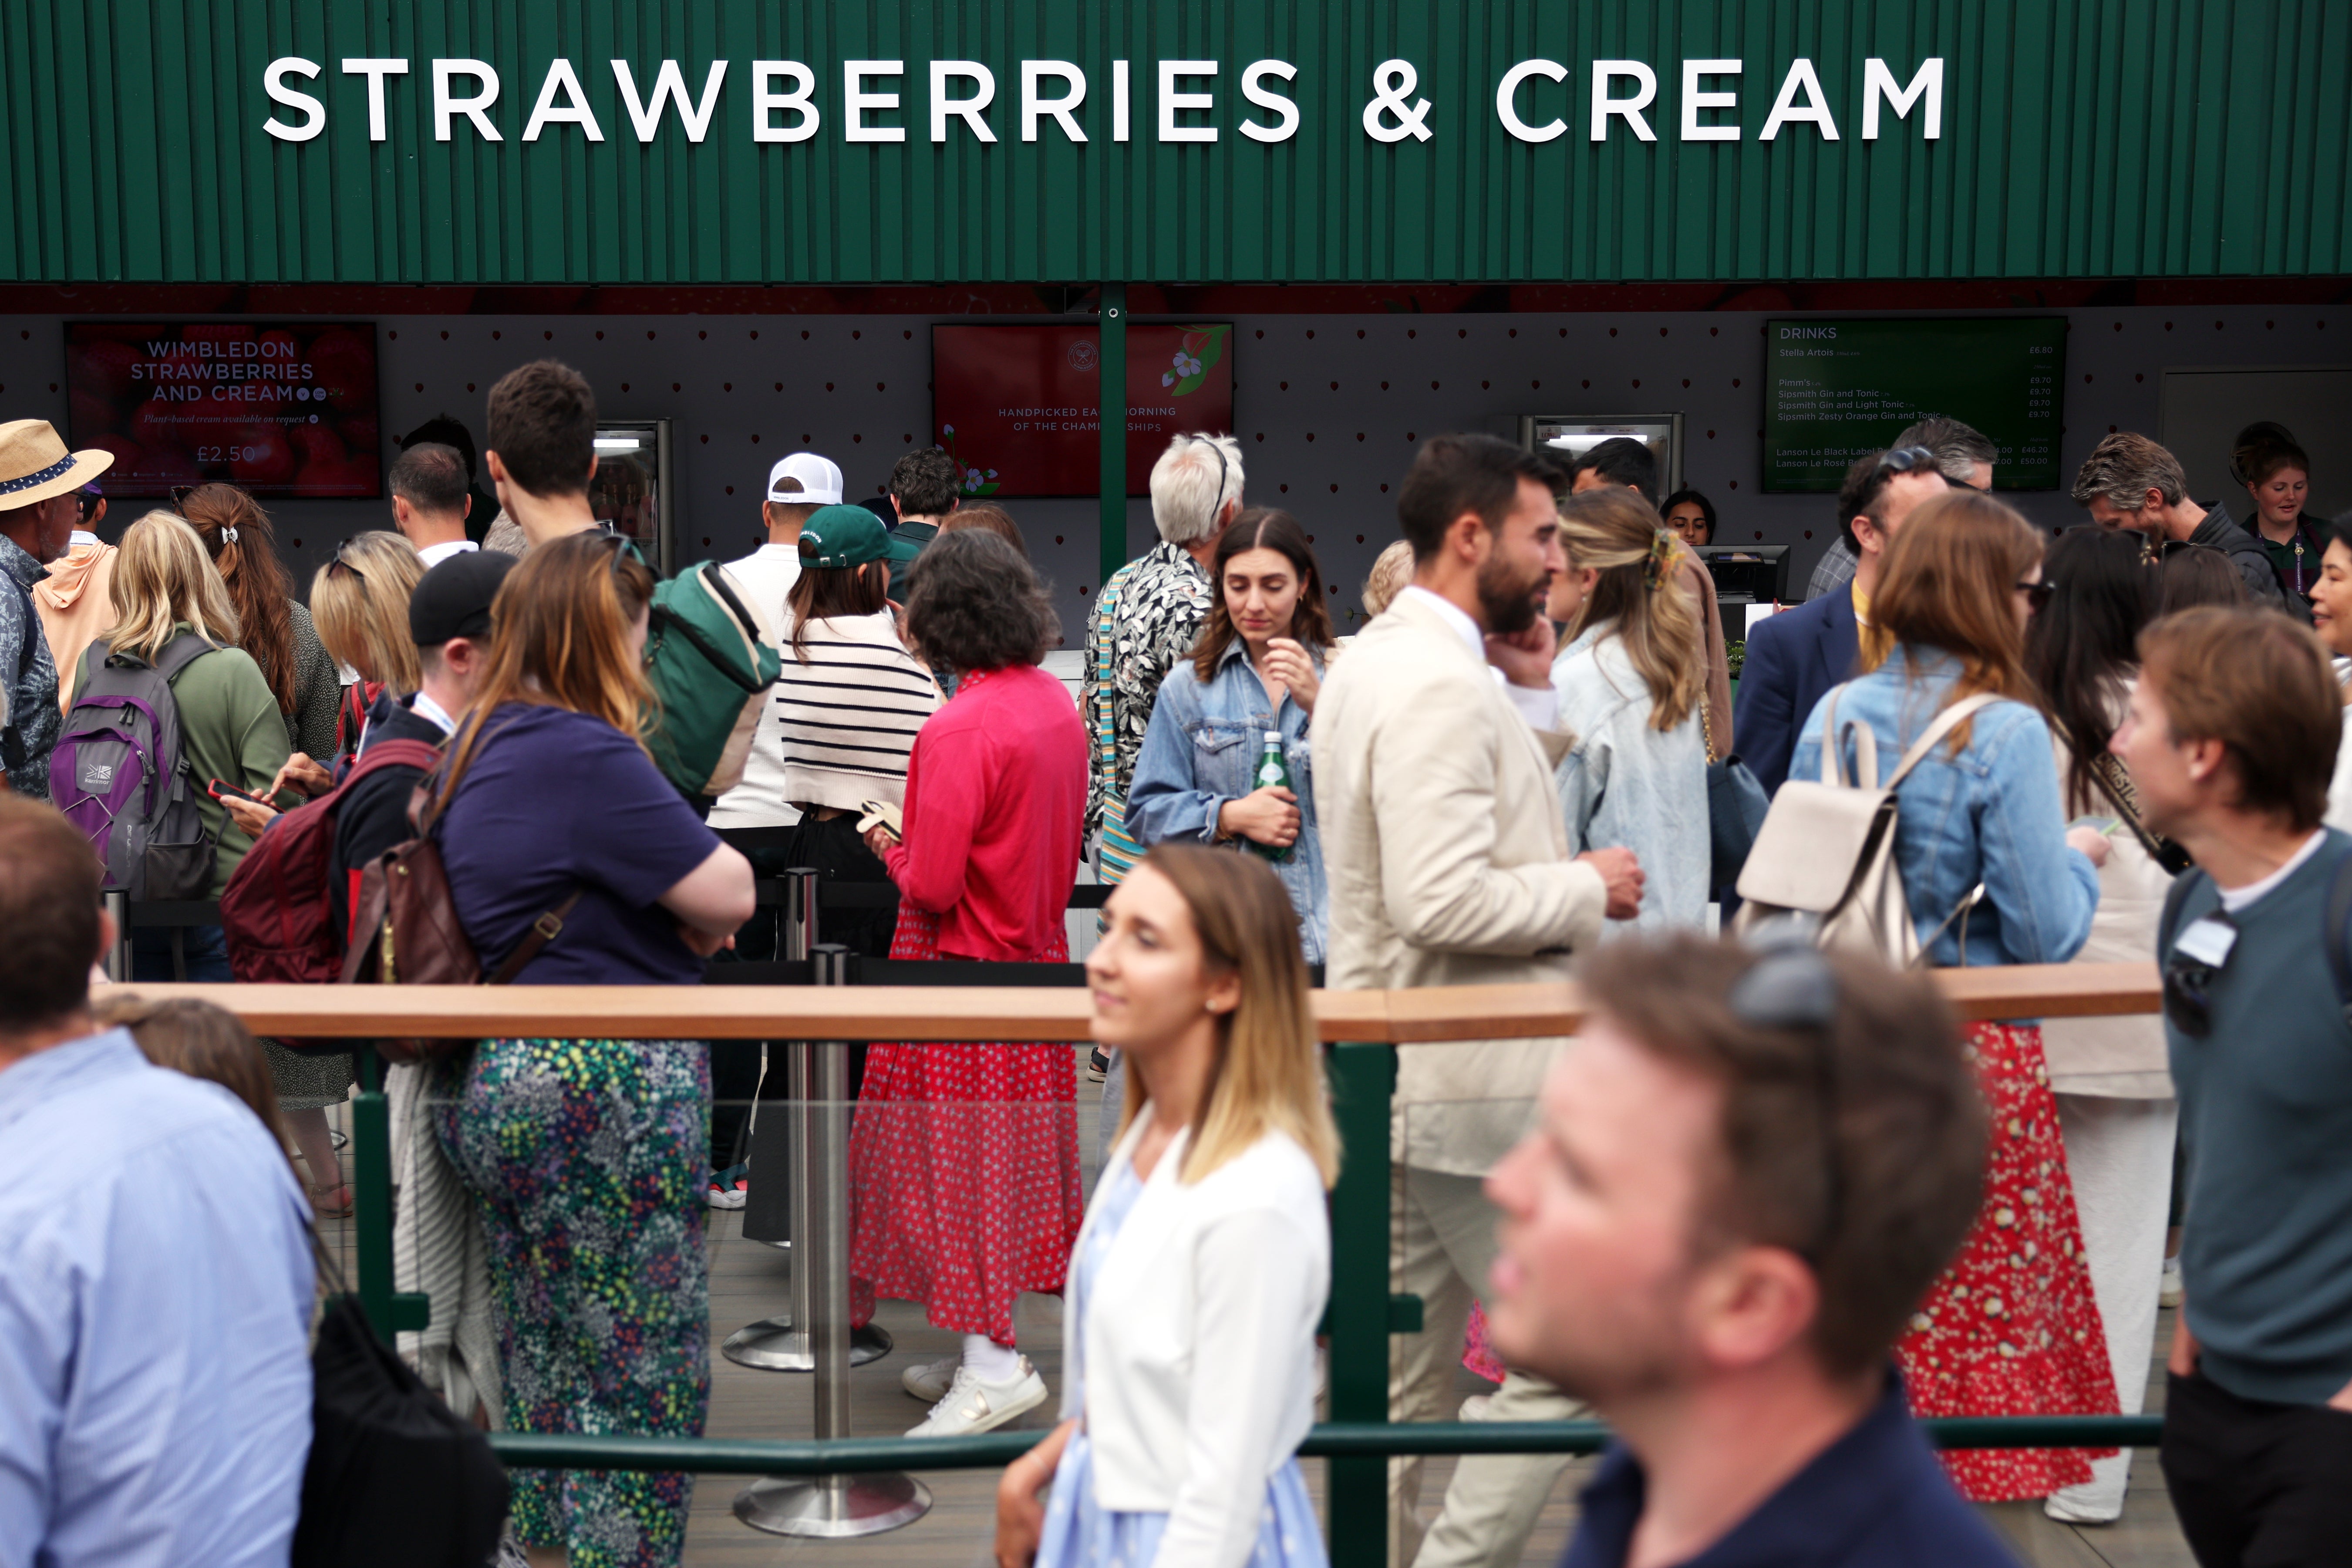 The queue for strawberries and cream, whose price has been frozen for a 13th year